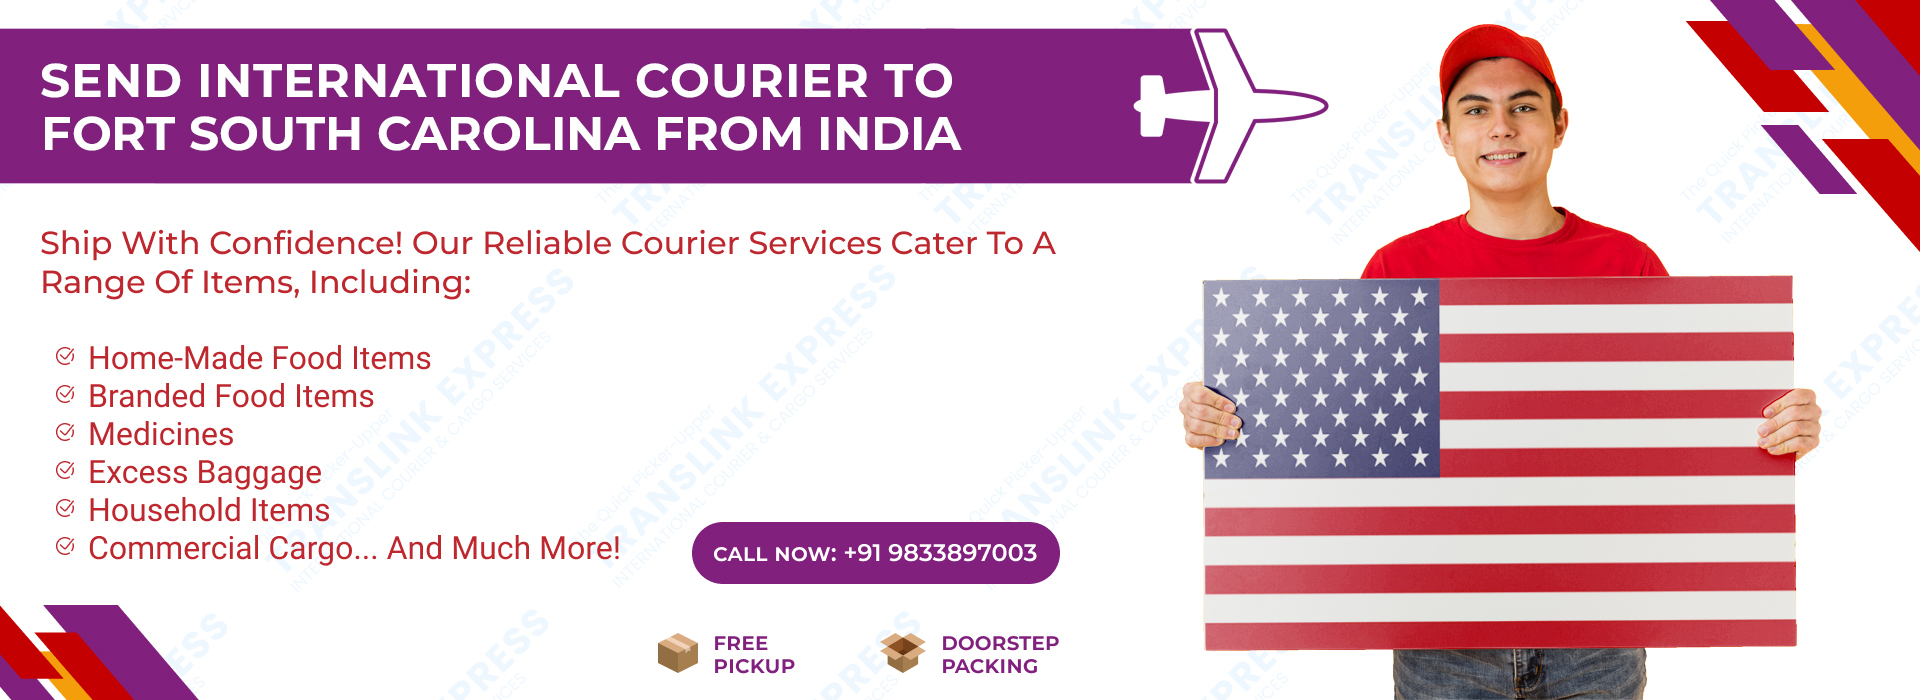 Courier to Fort South Carolina From India